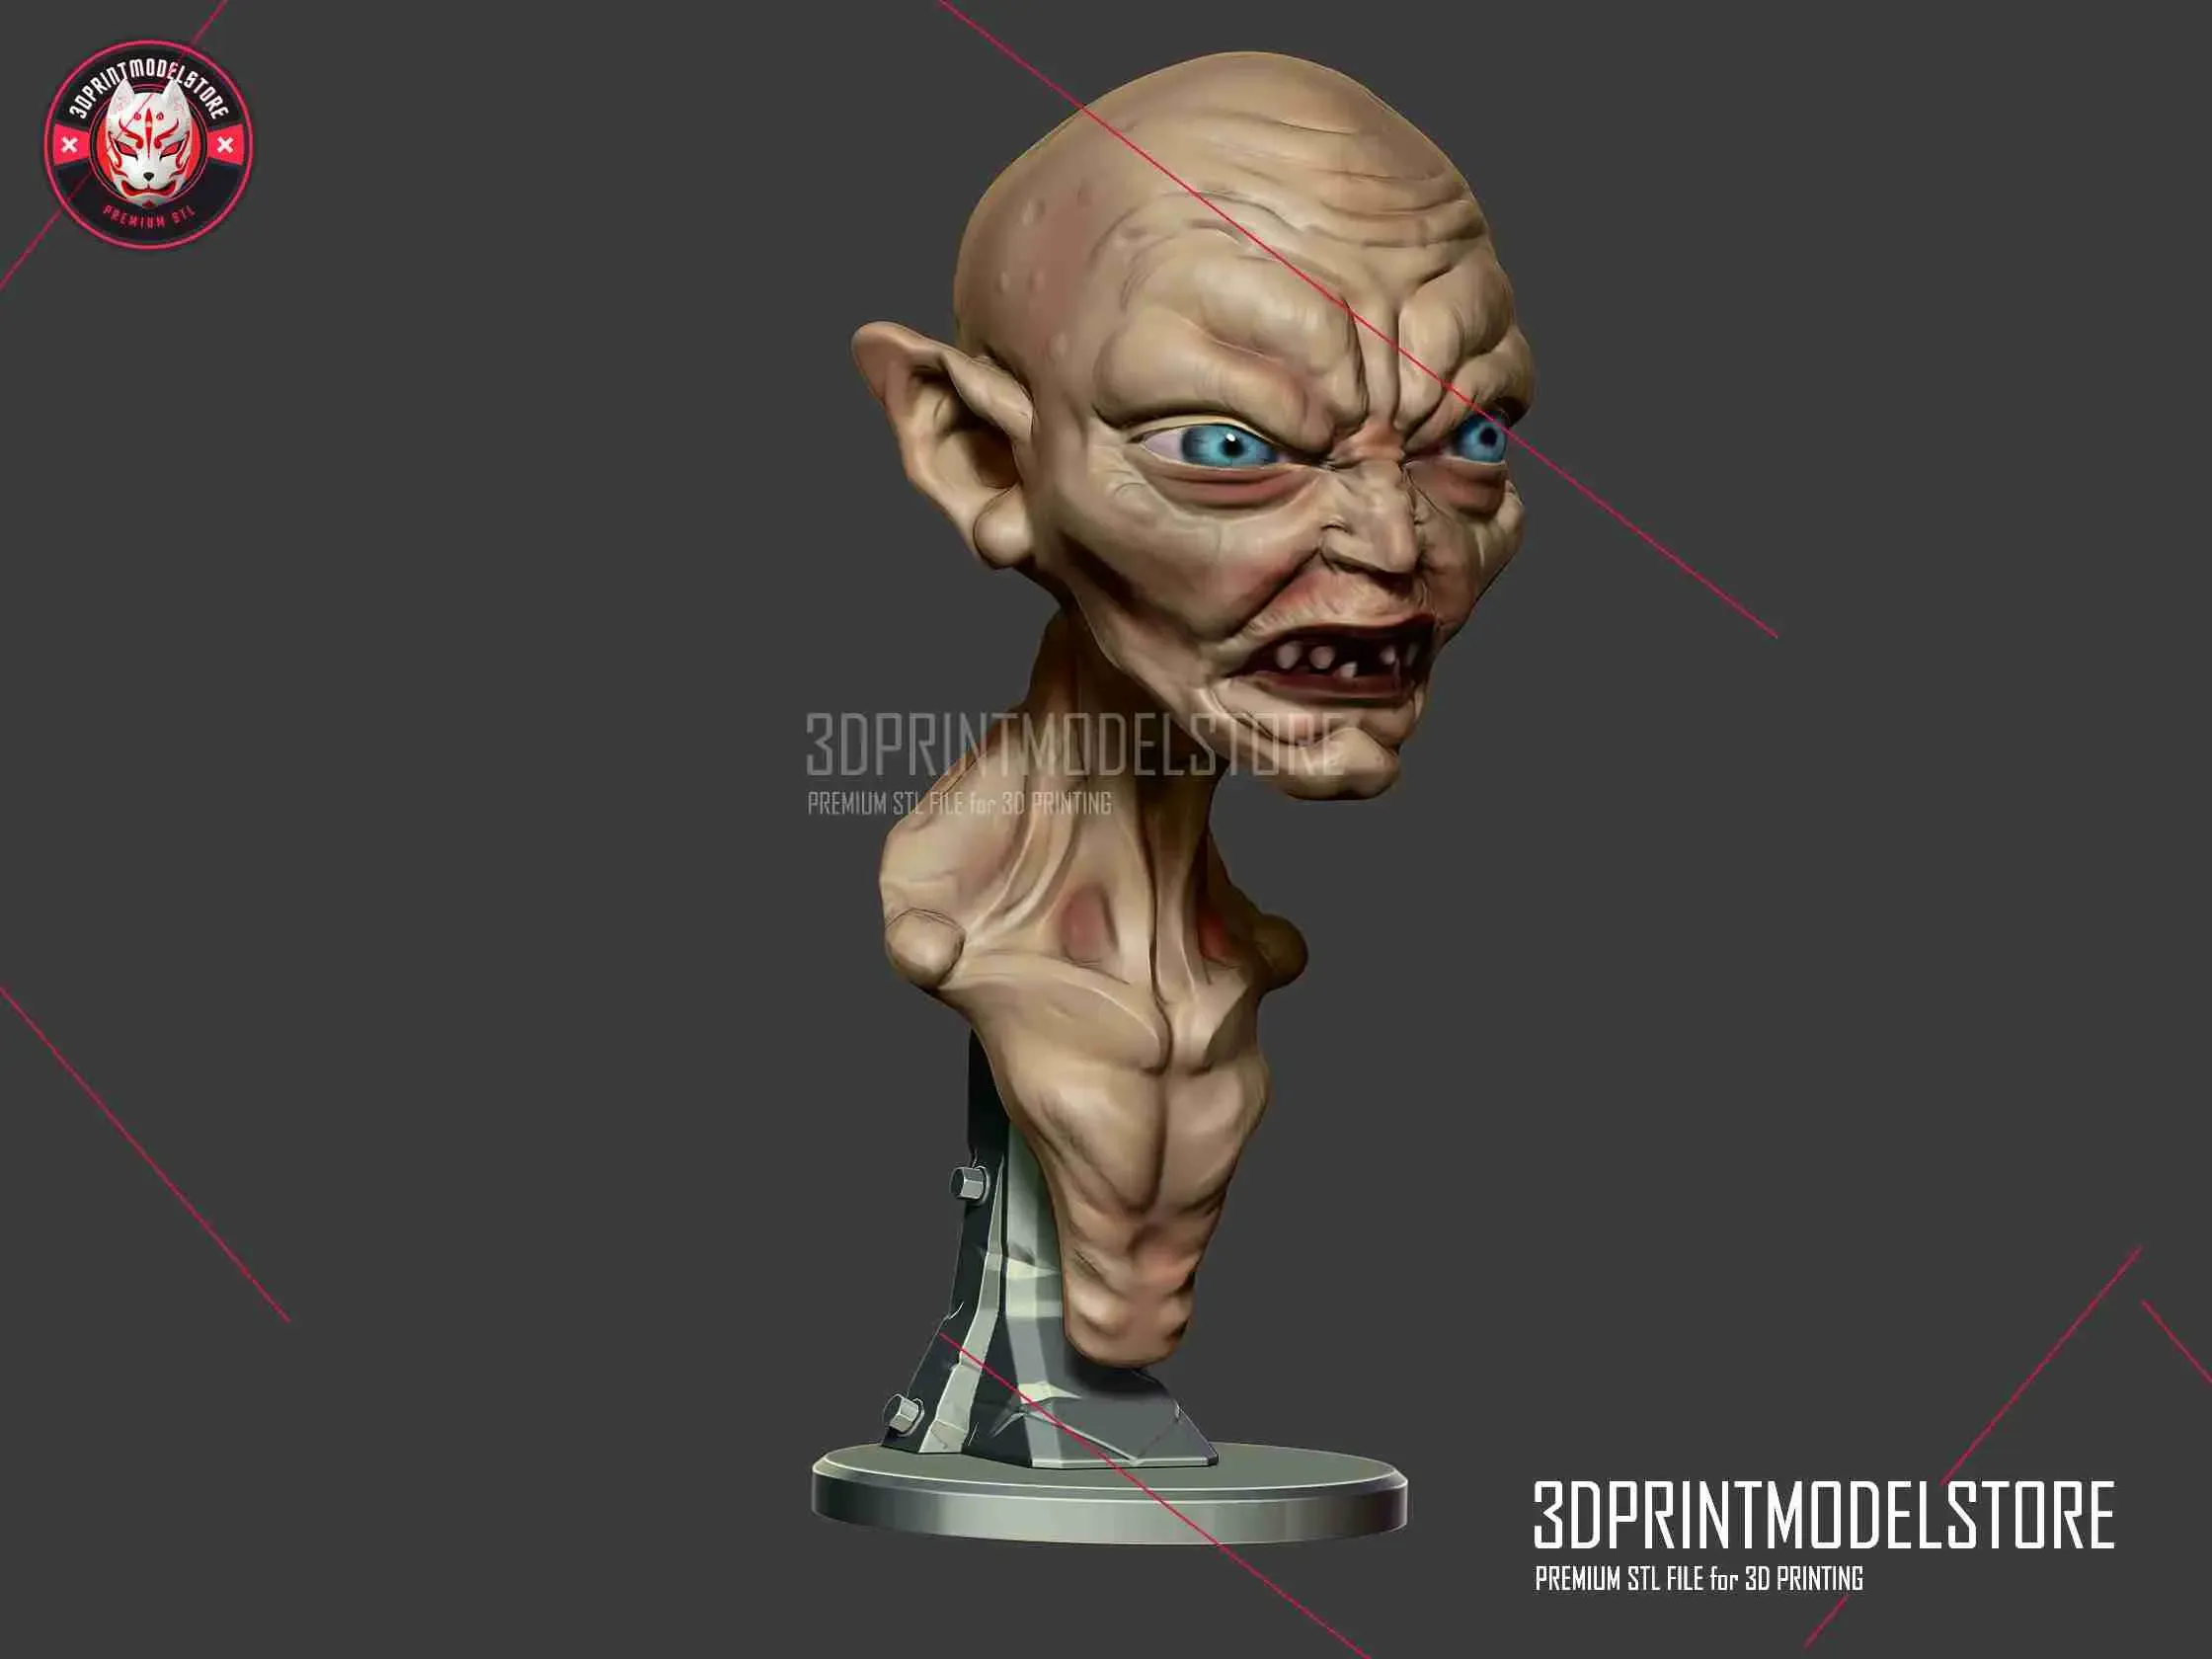 Gollum Miniature Bust Toy - Lord of the Rings